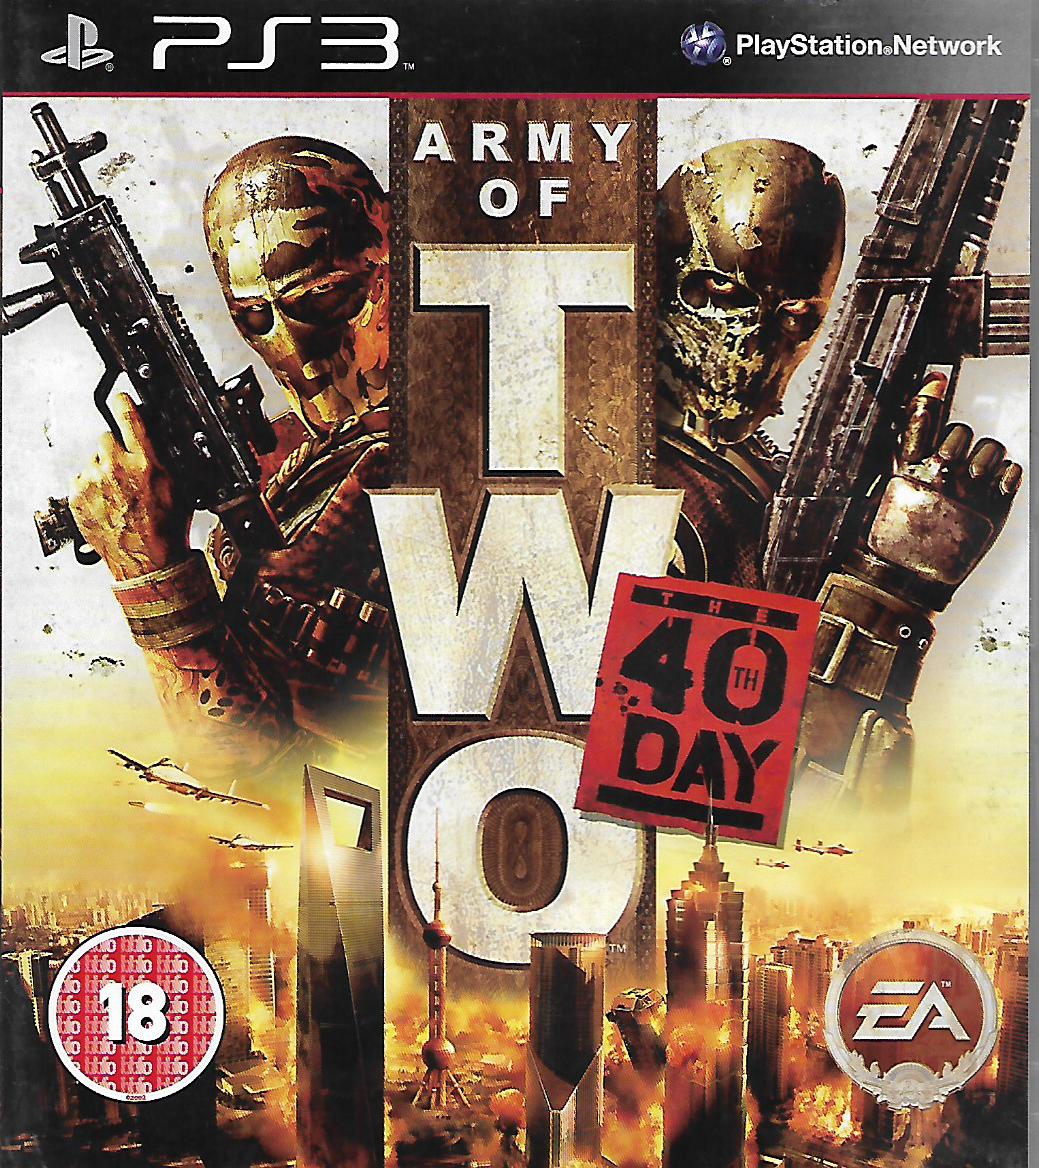 ARMY OF TWO - THE 40TH DAY (PS3 - bazar)